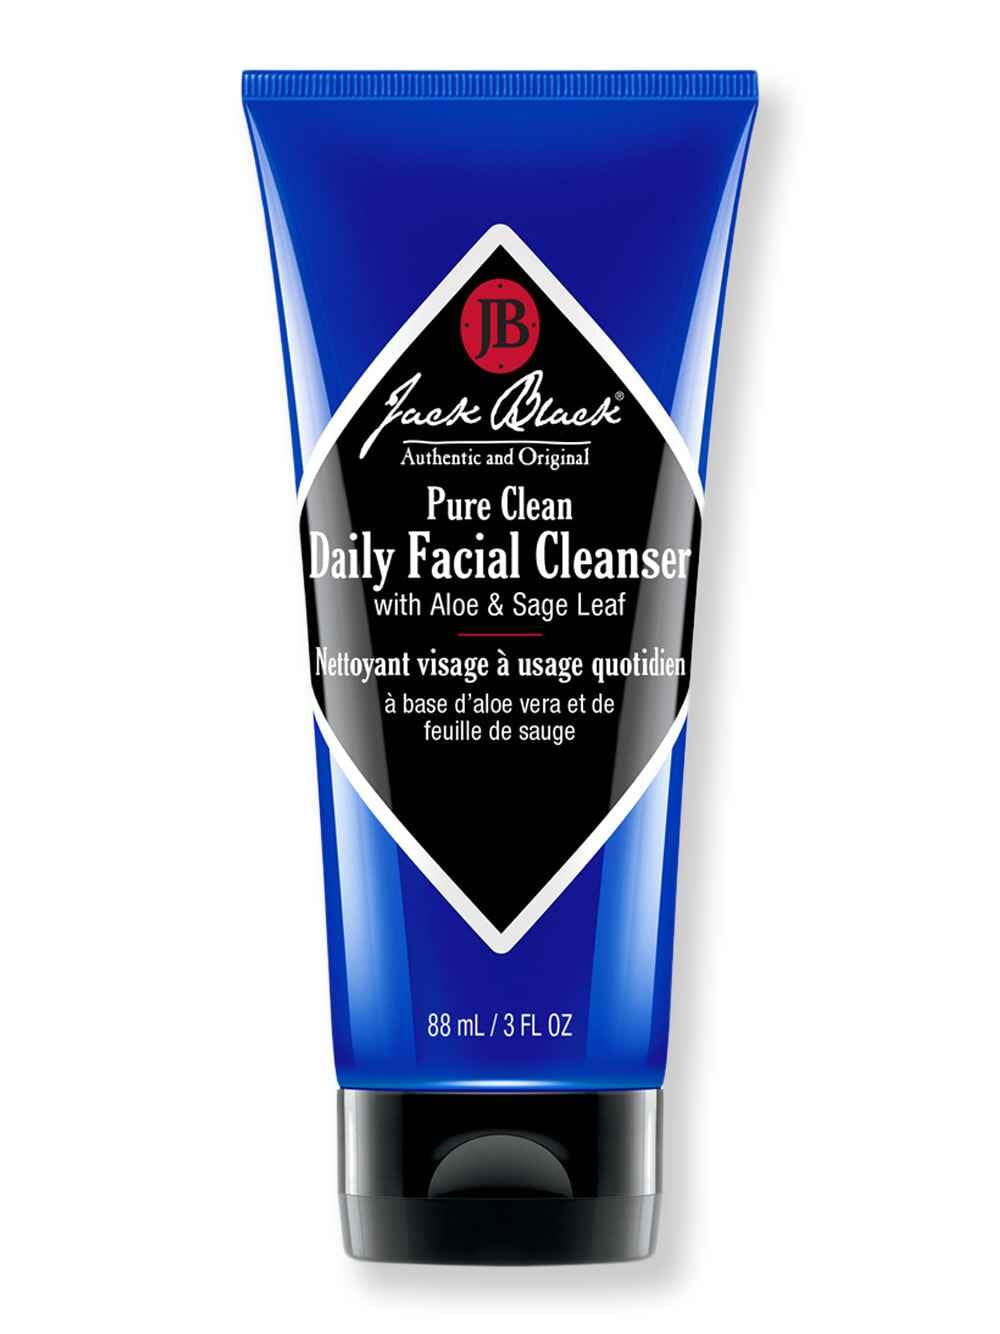 Jack Black Jack Black Pure Clean Daily Facial Cleanser 3 oz Face Cleansers 